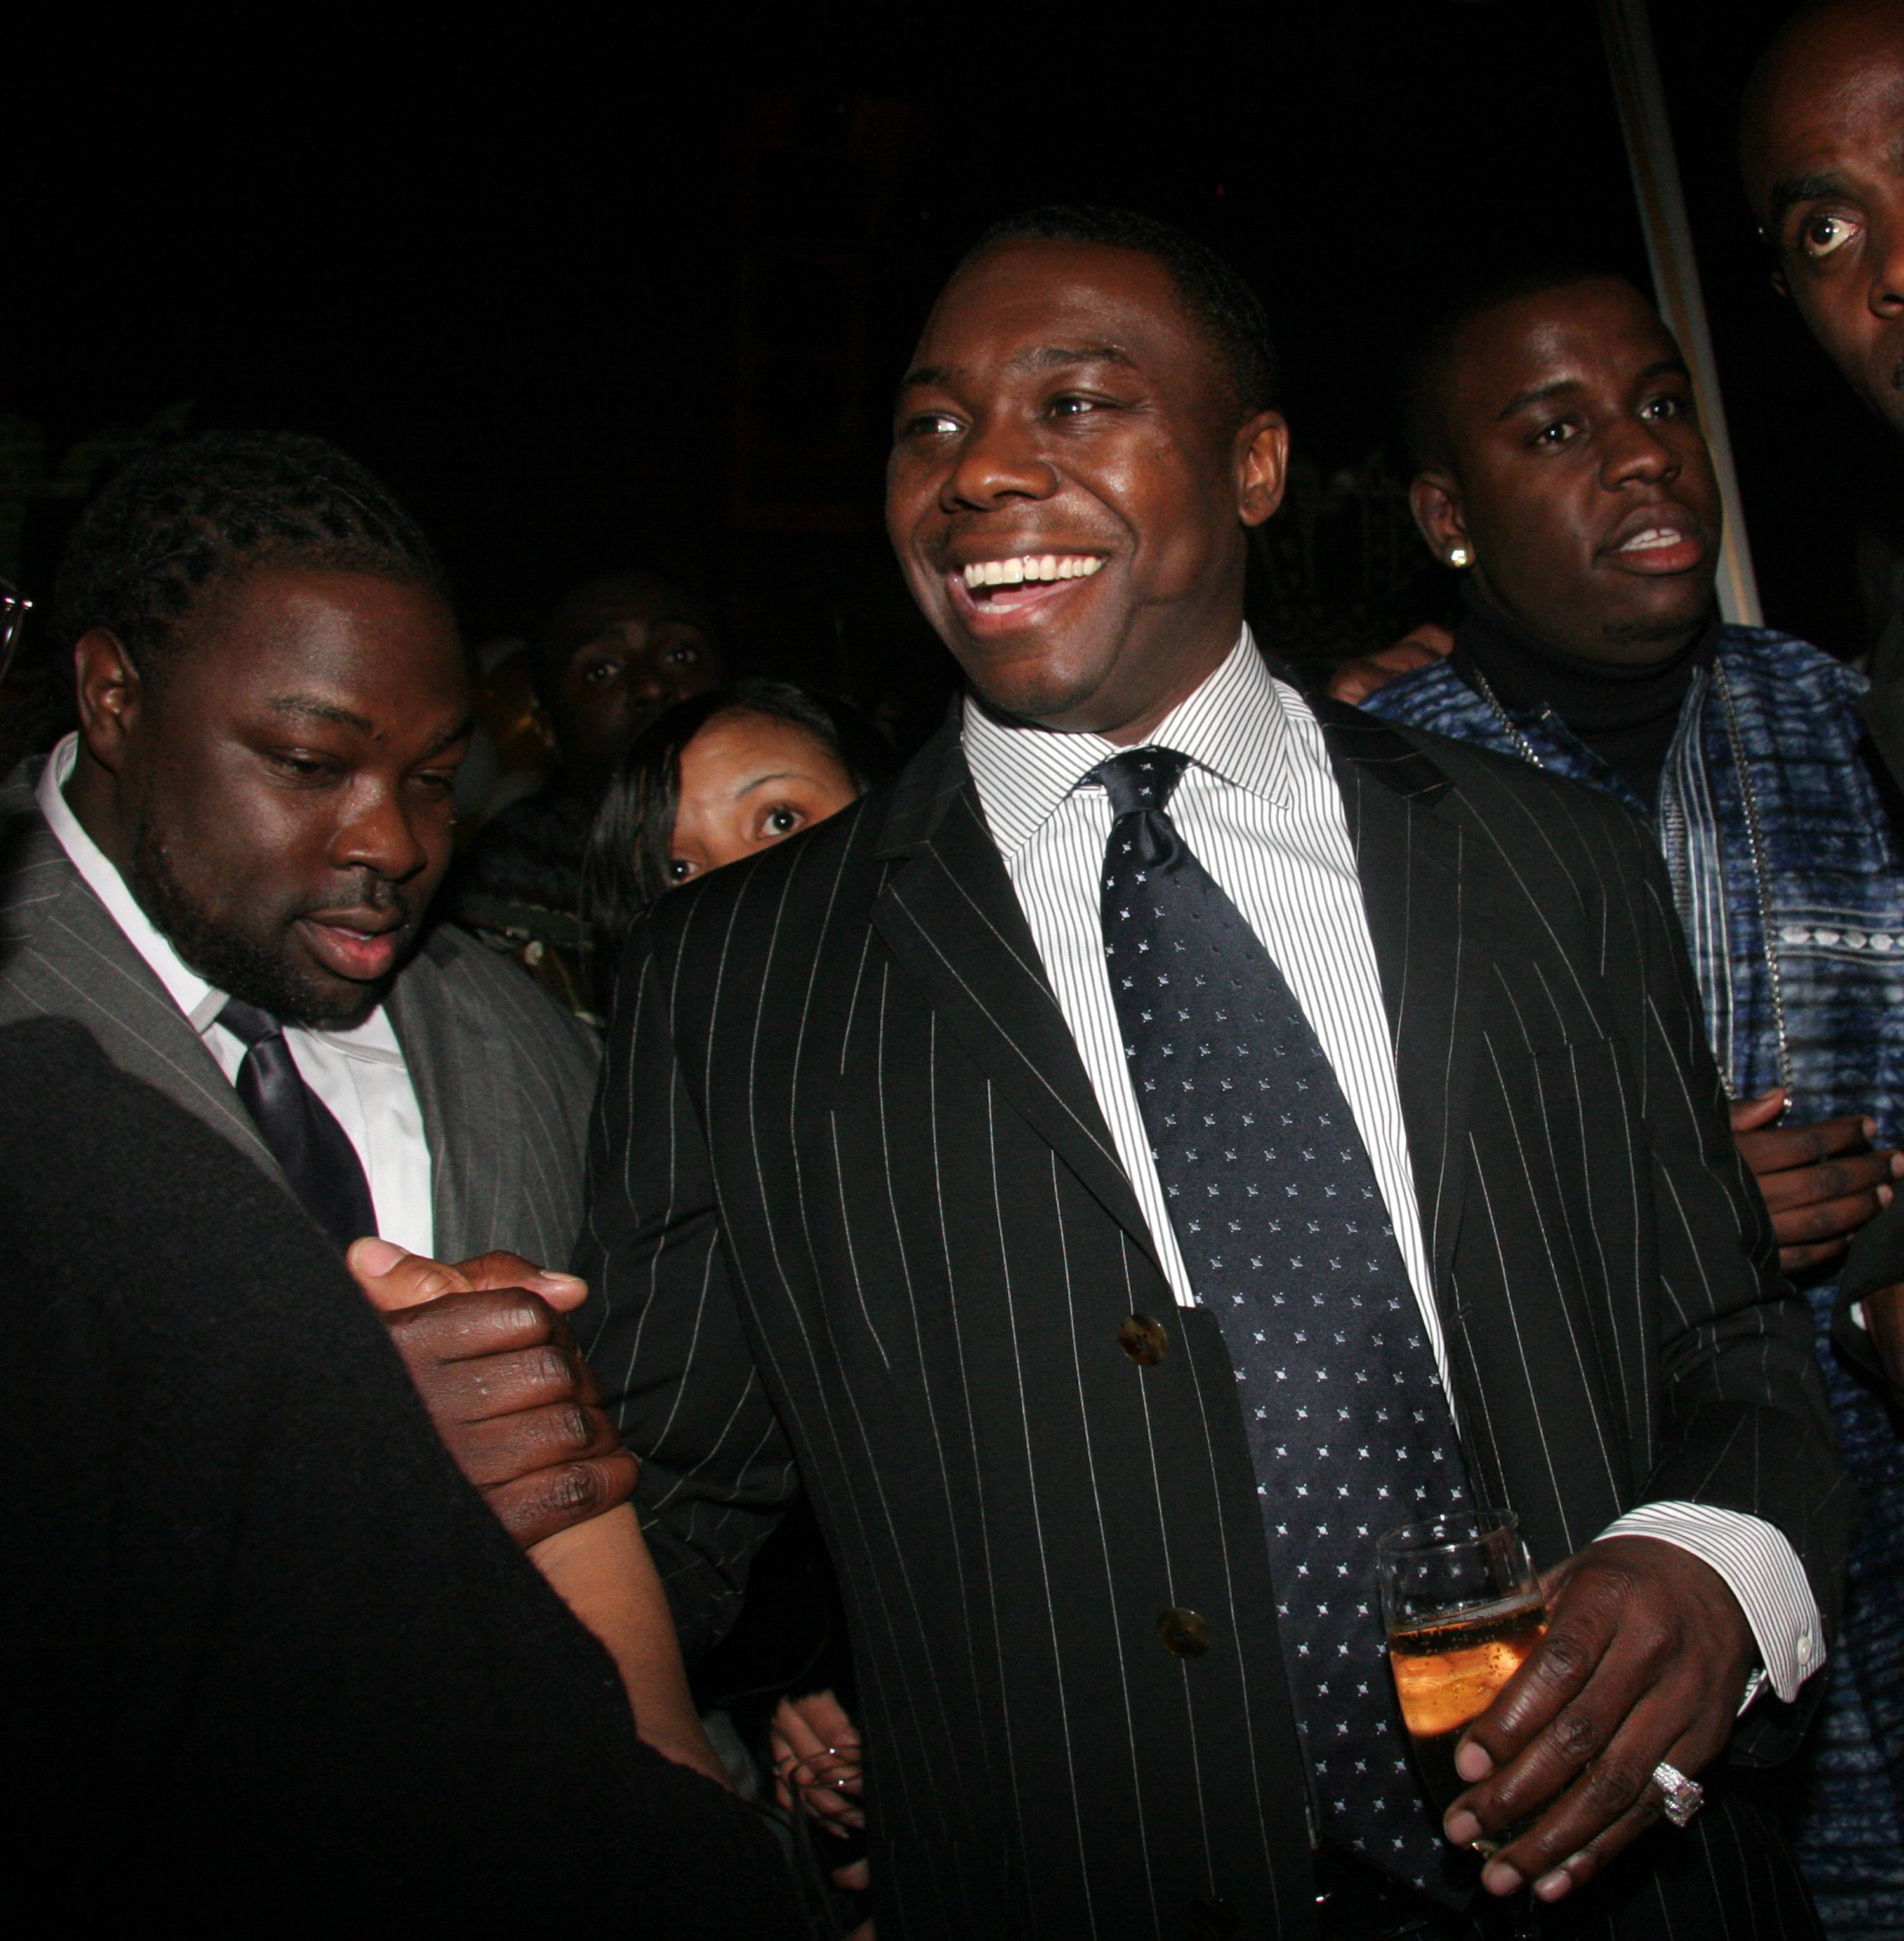 Jimmy Henchman Will Spend The Rest Of His Life Behind Bars For Murder